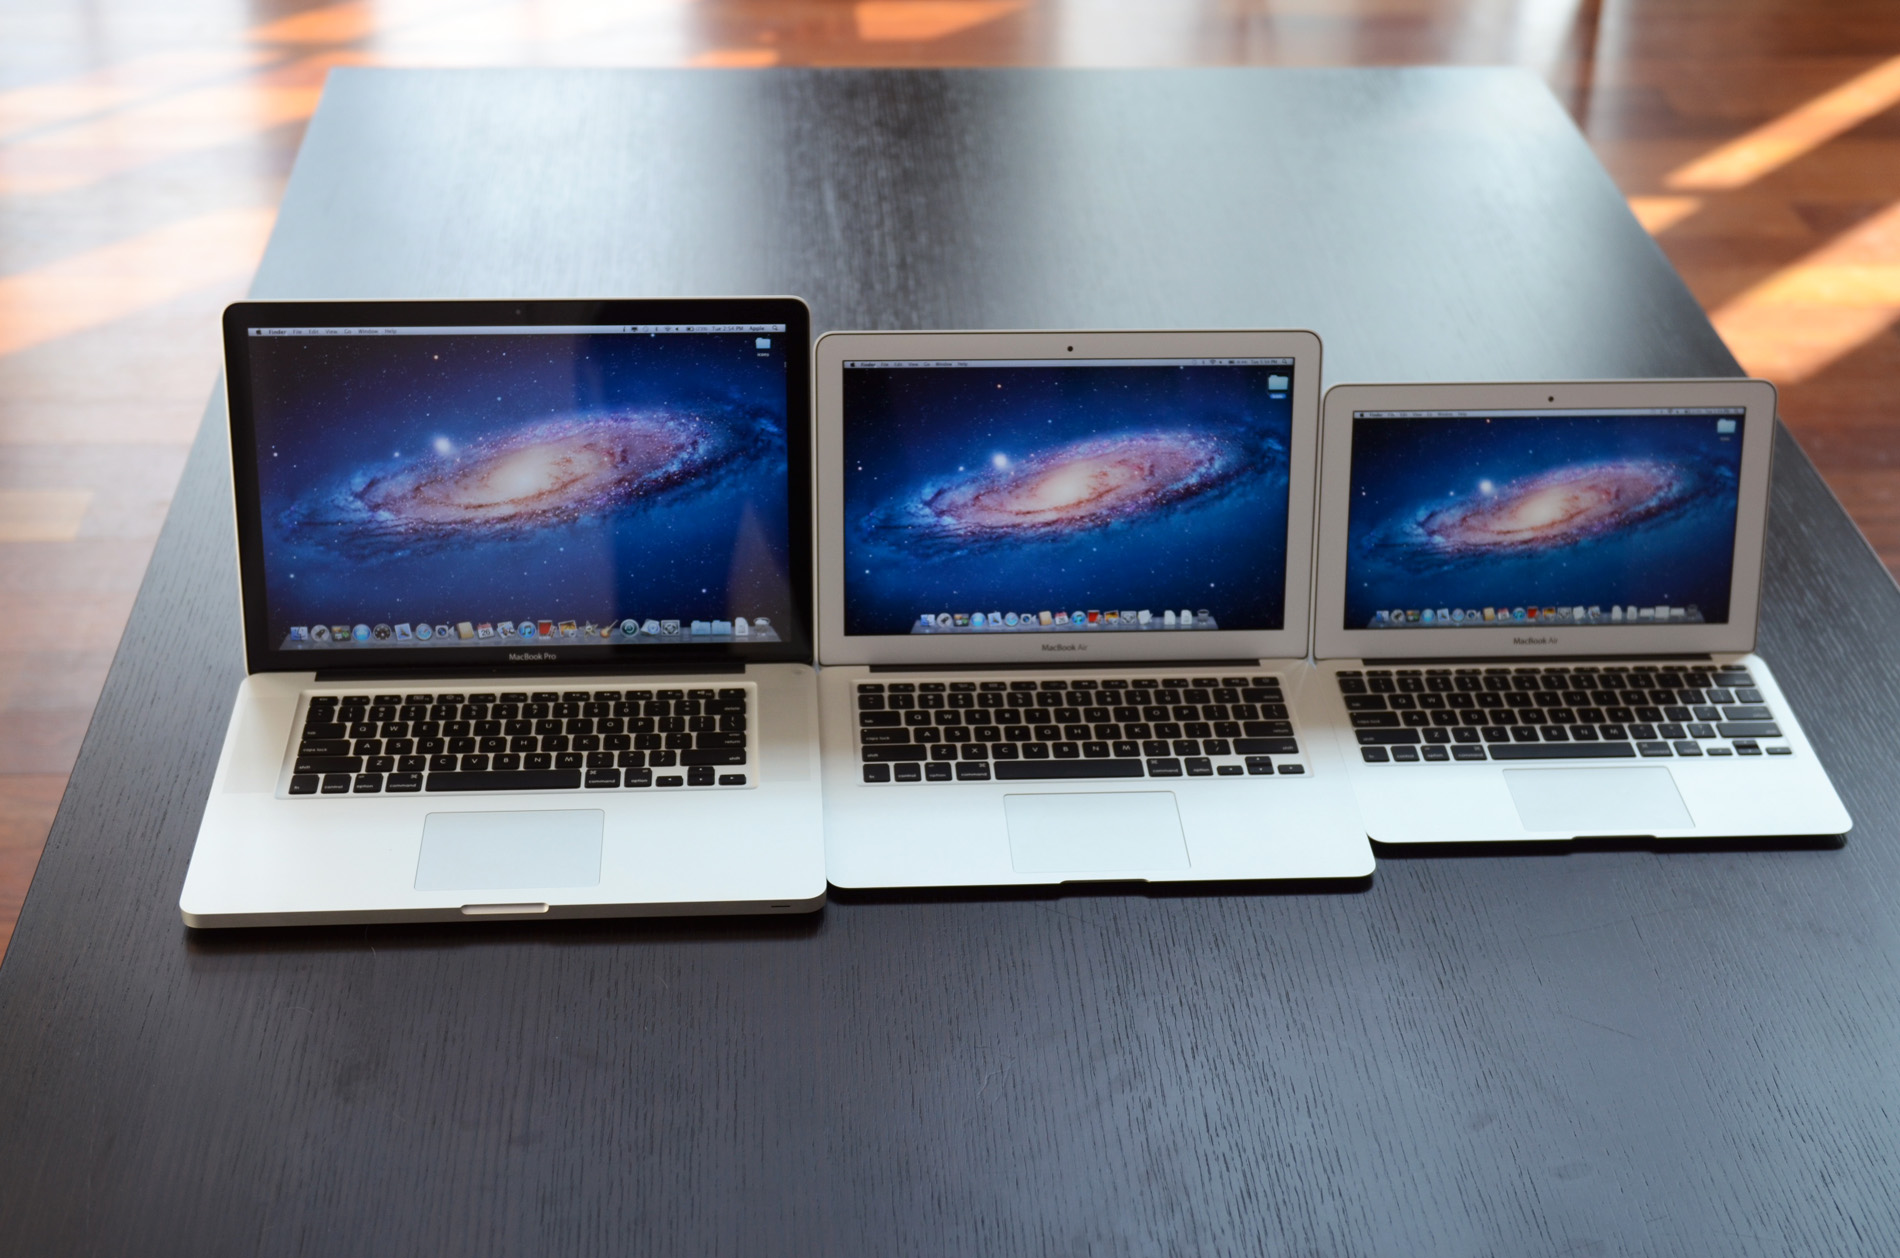 Final Words - The 2011 MacBook Air (11 & 13-inch): Thoroughly Reviewed